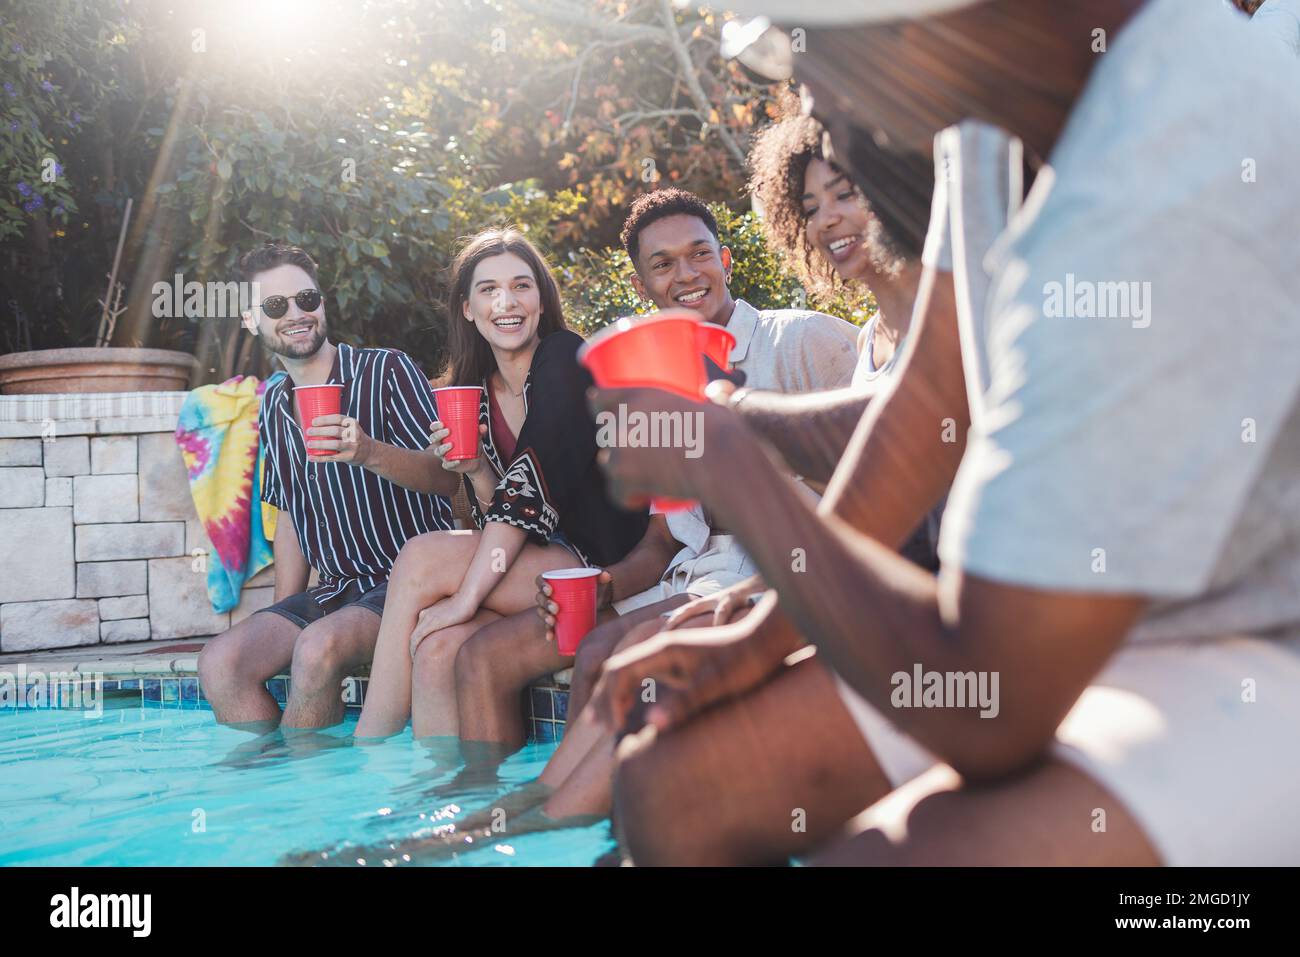 Pool party with sangria pitcher, fruit cocktails and refreshments by the  swimming pool. Summer lifestyle, topical vacation, fun and relaxation theme  Stock Photo - Alamy